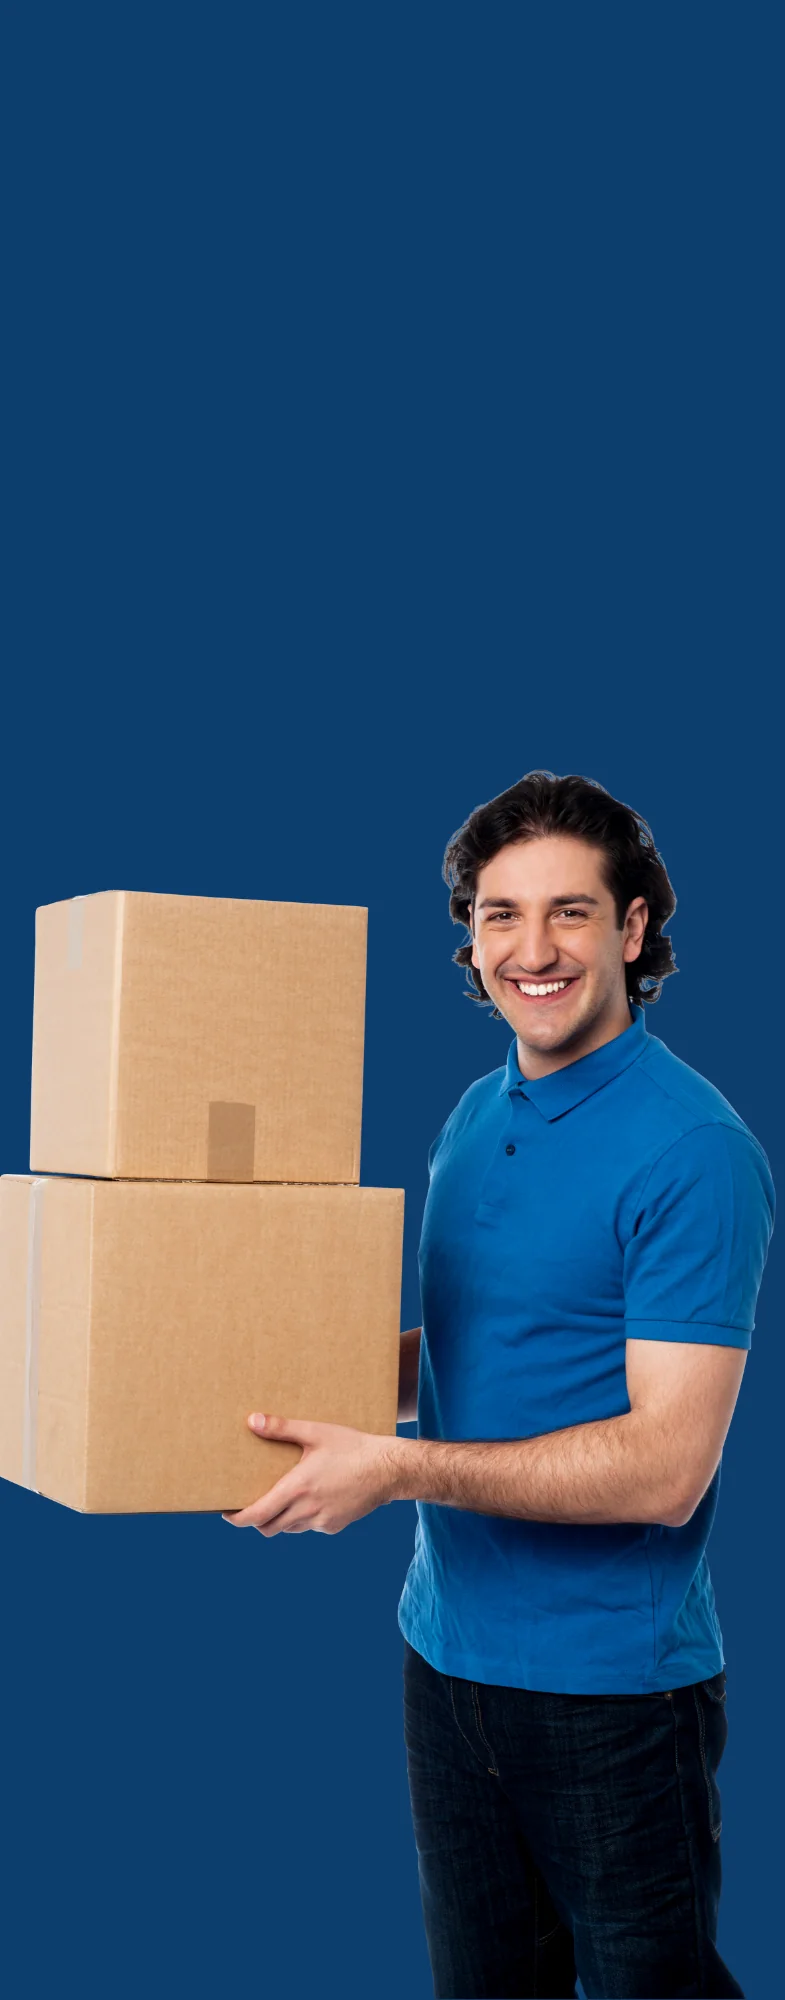 A gentlemen wearing a blue shirt holding two boxes and smiling